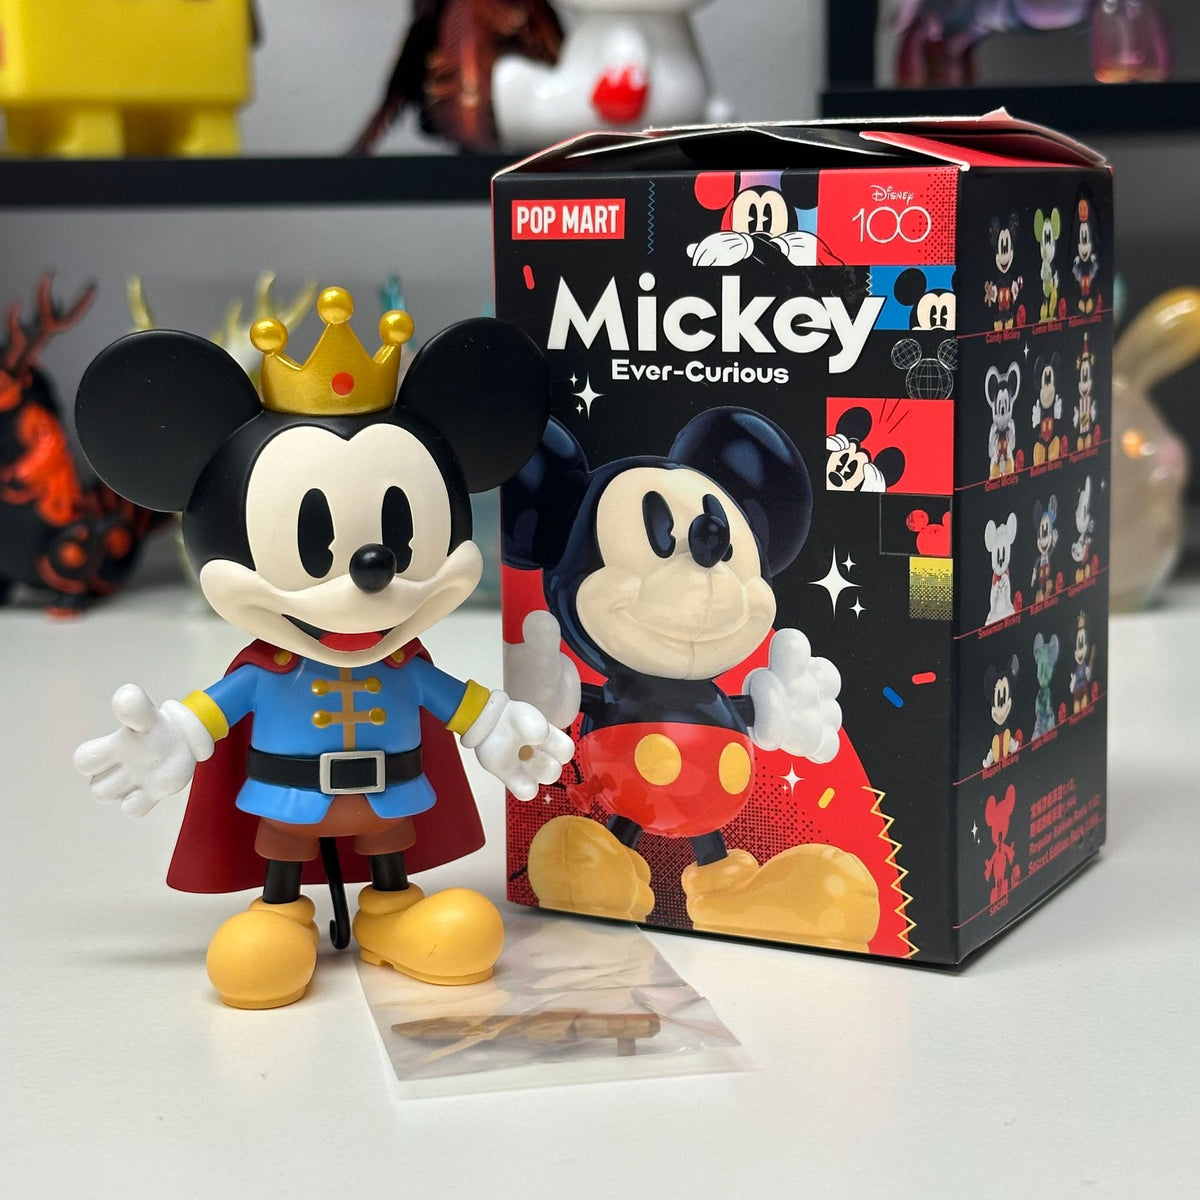 Mickey Ever-Curious Blind Box by POP MART - Prince Mickey - 1